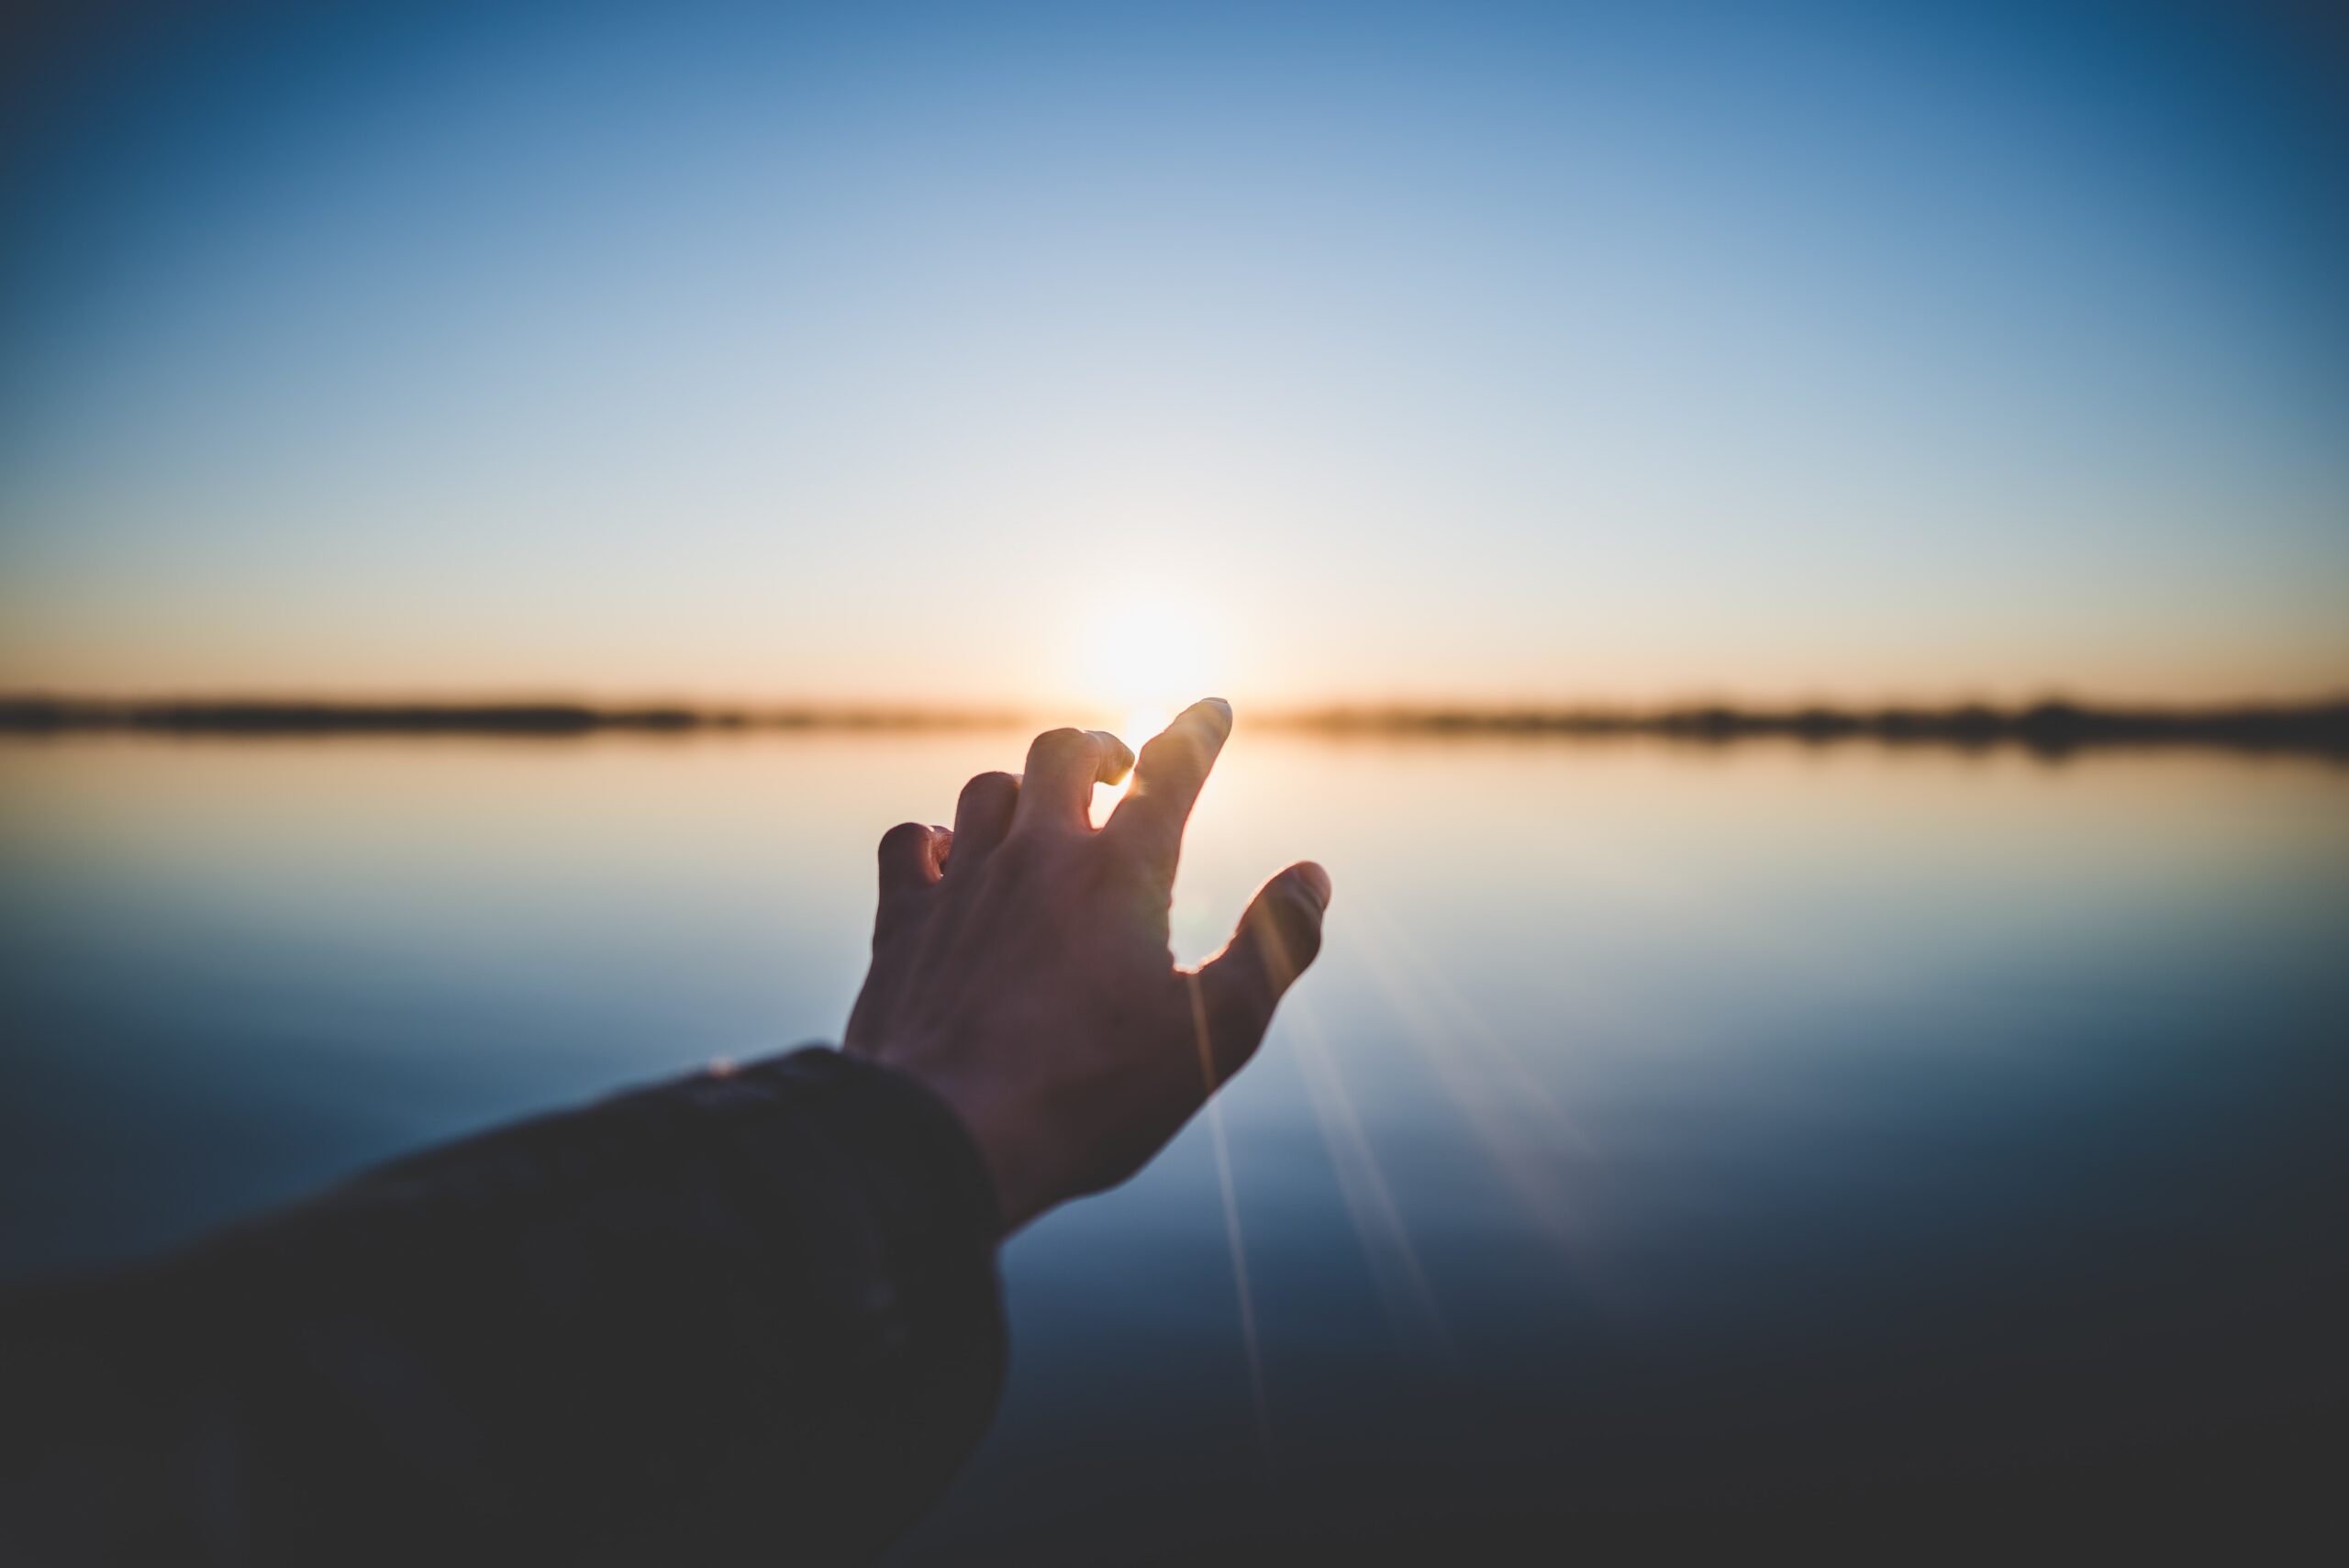 hand reaching for the sun | Photo by Marc-Olivier Jodoin on Unsplash